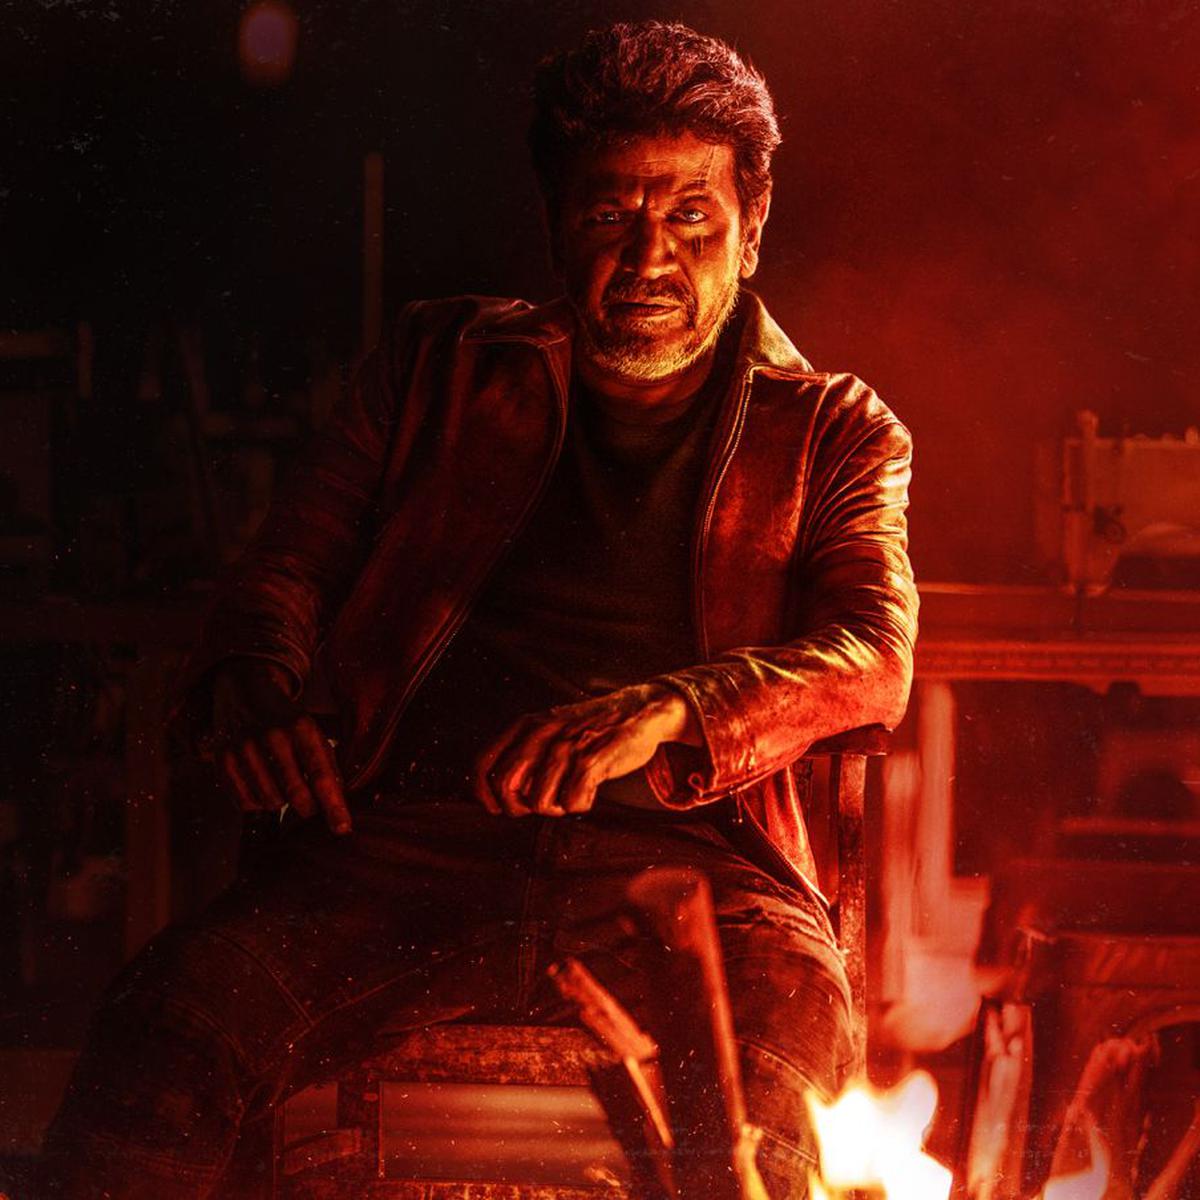 Ghost' Movie Review: Shiva Rajkumar's film is all sass and mass